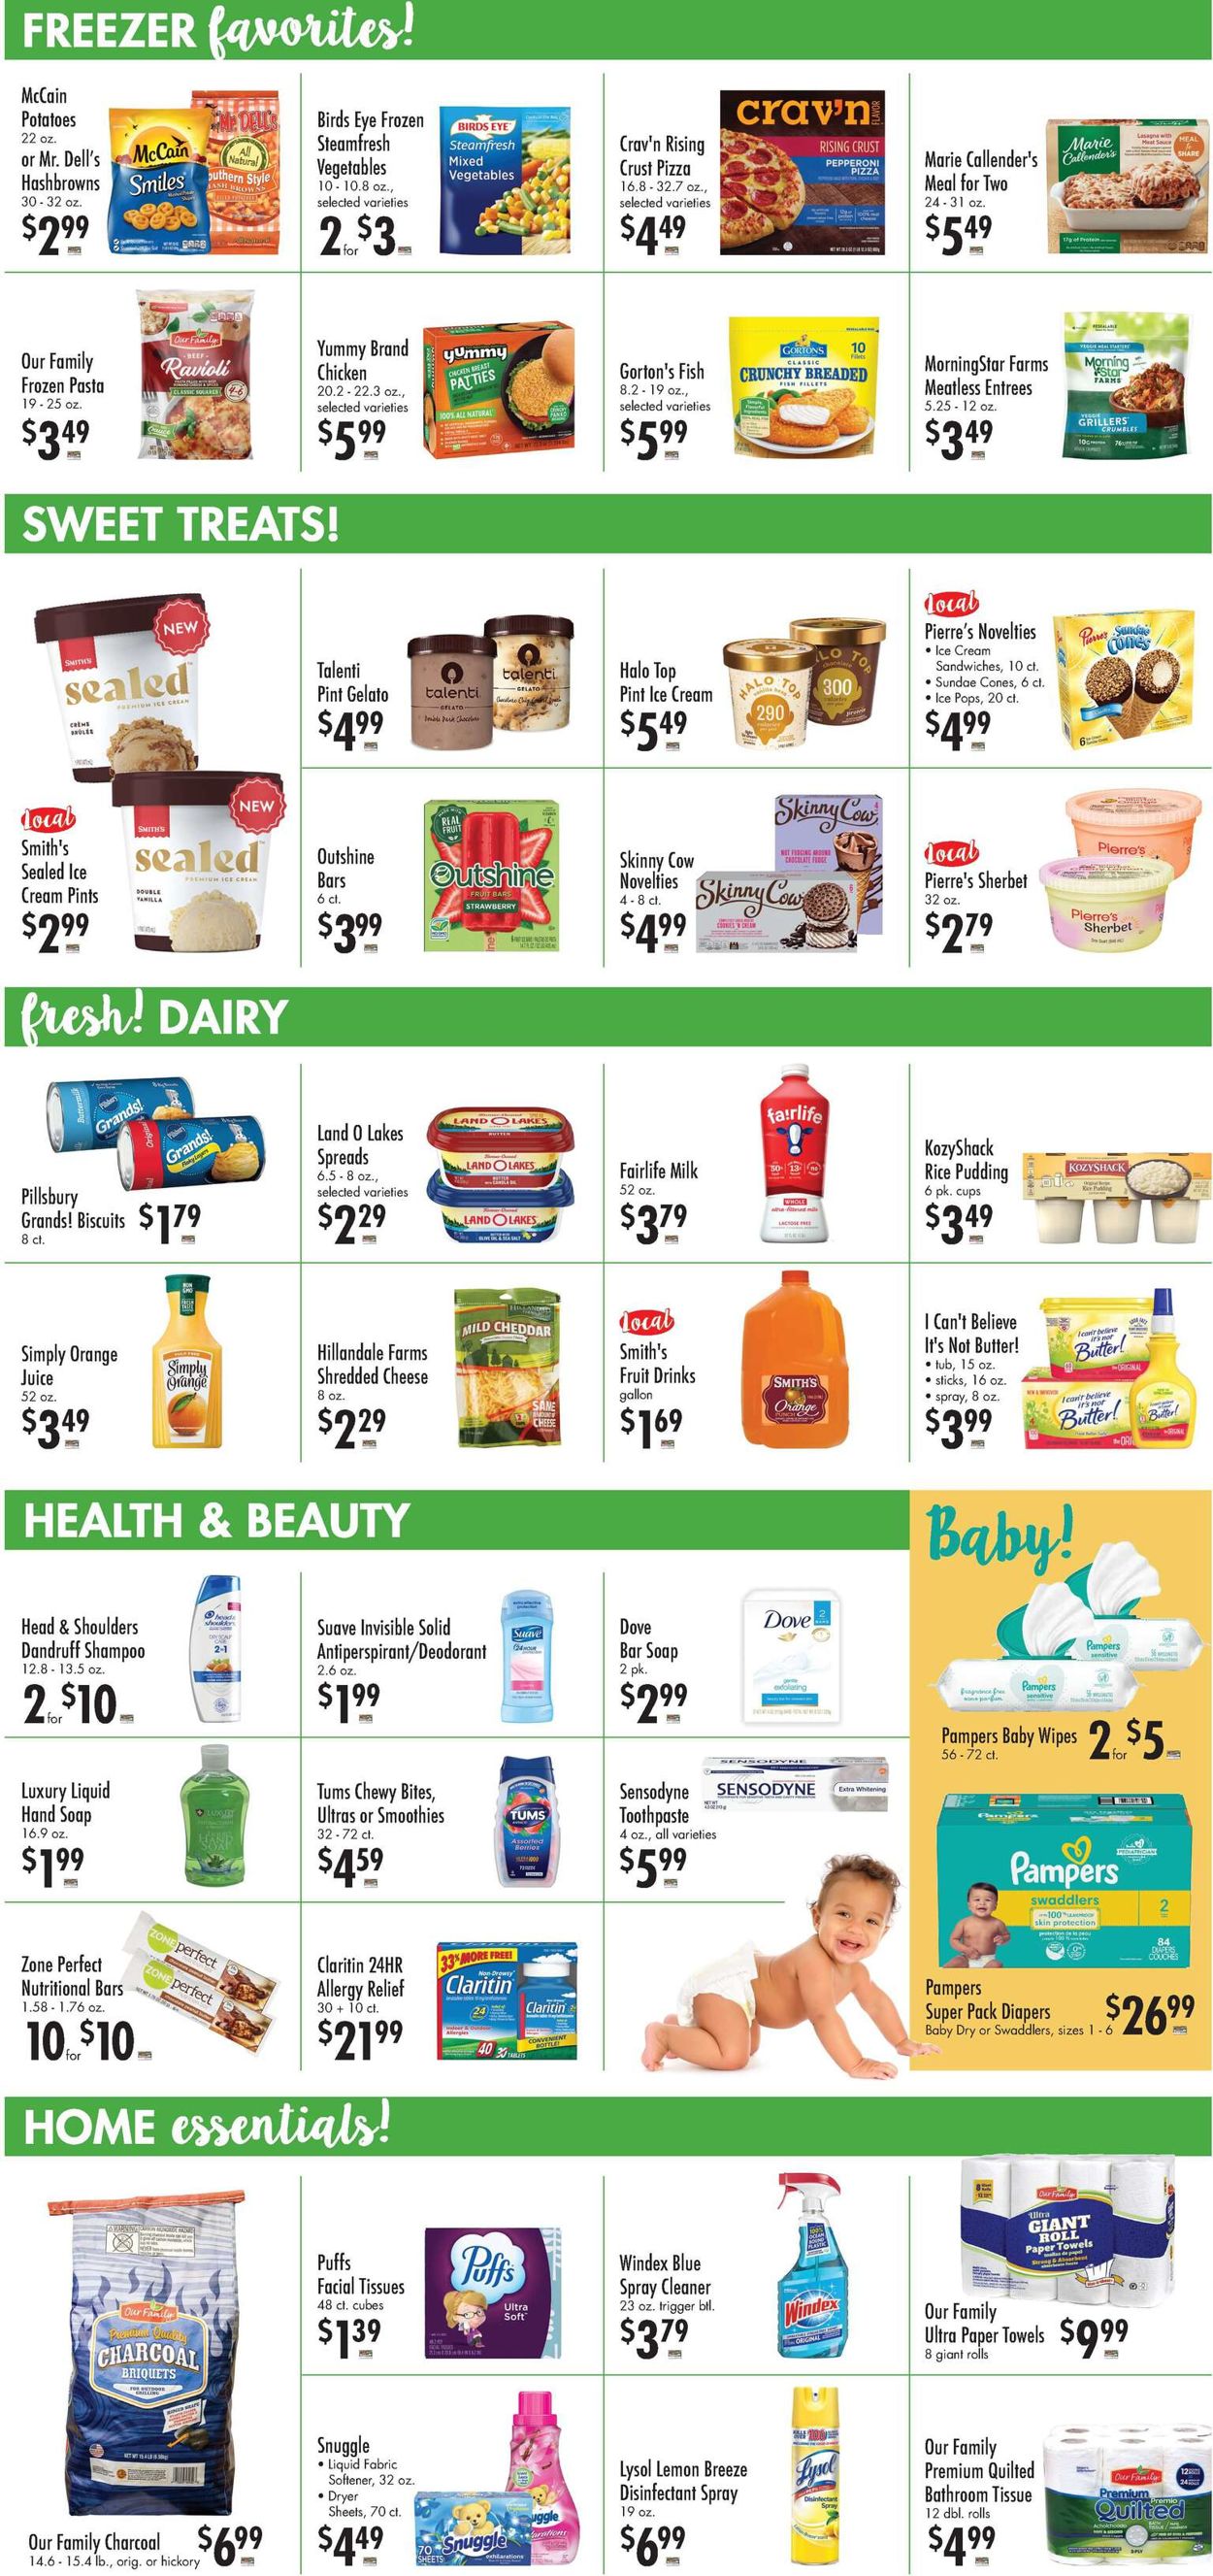 Catalogue Buehler's Fresh Foods from 05/11/2022